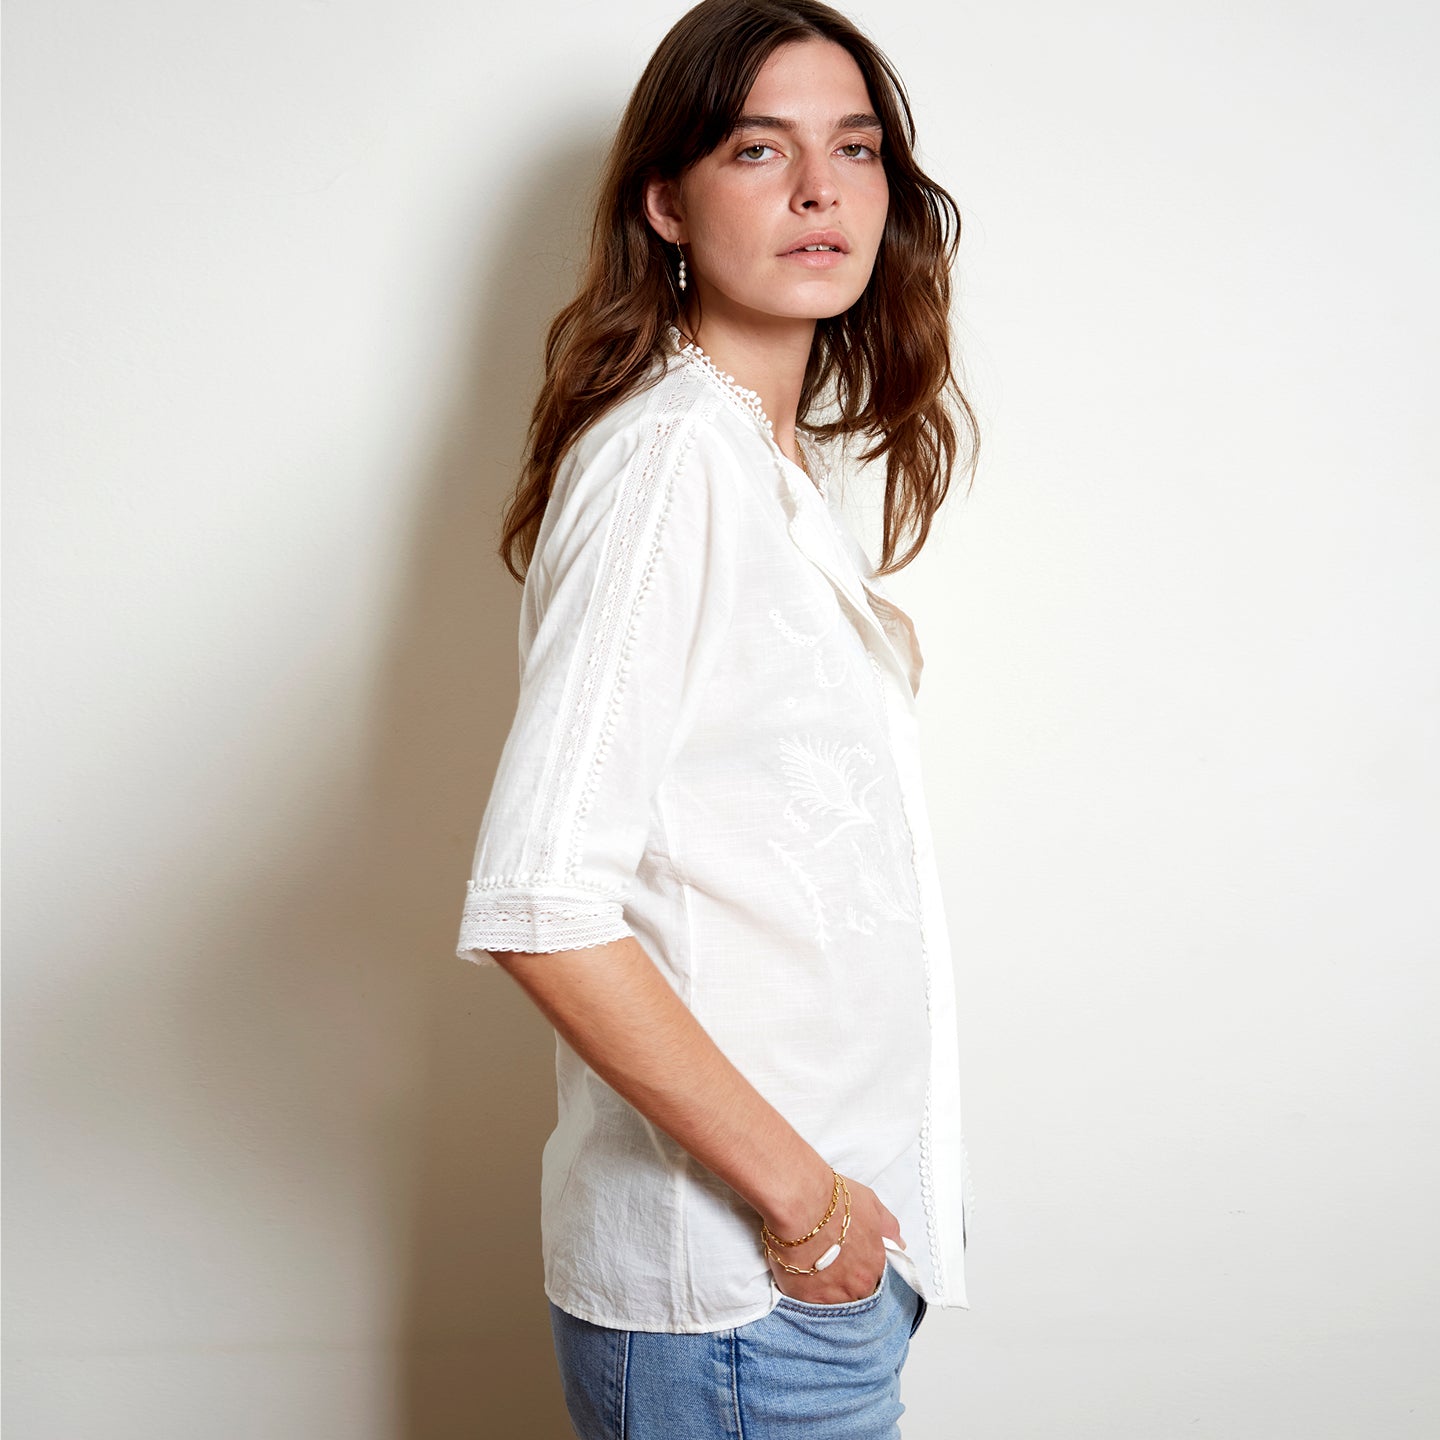 Spring Camille blouse